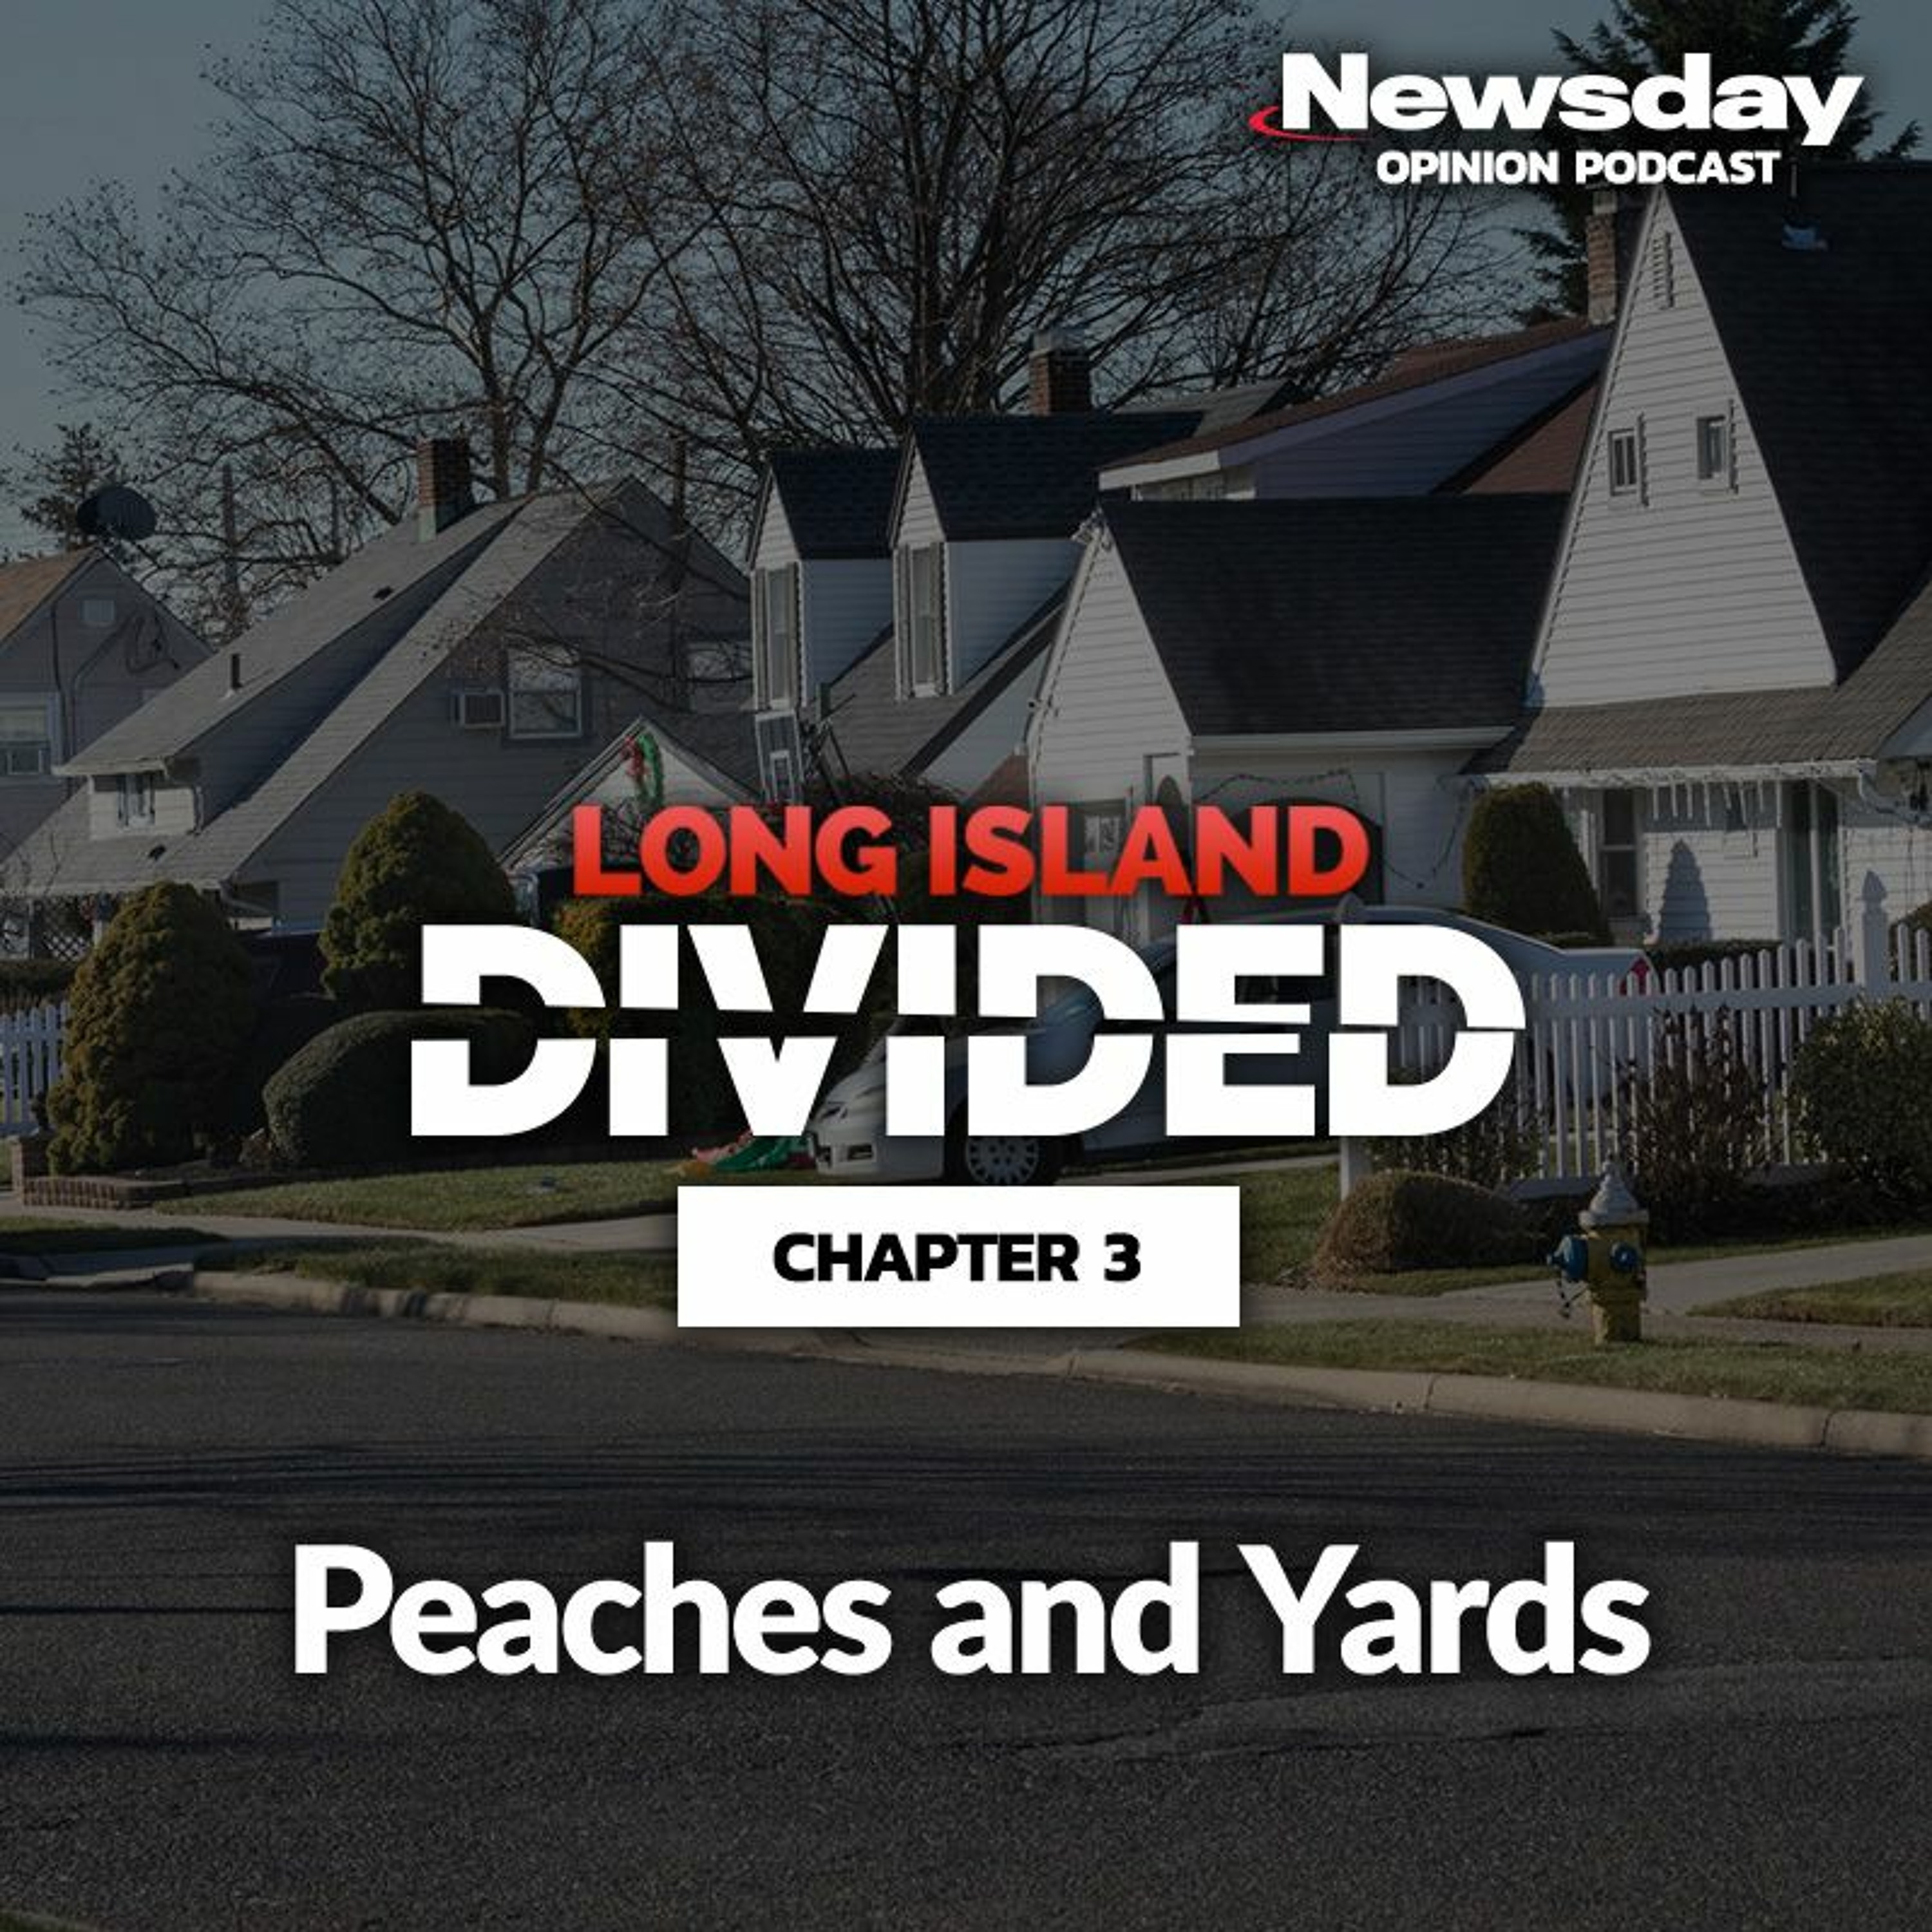 Long Island Divided Chapter 3: Peaches and Yards